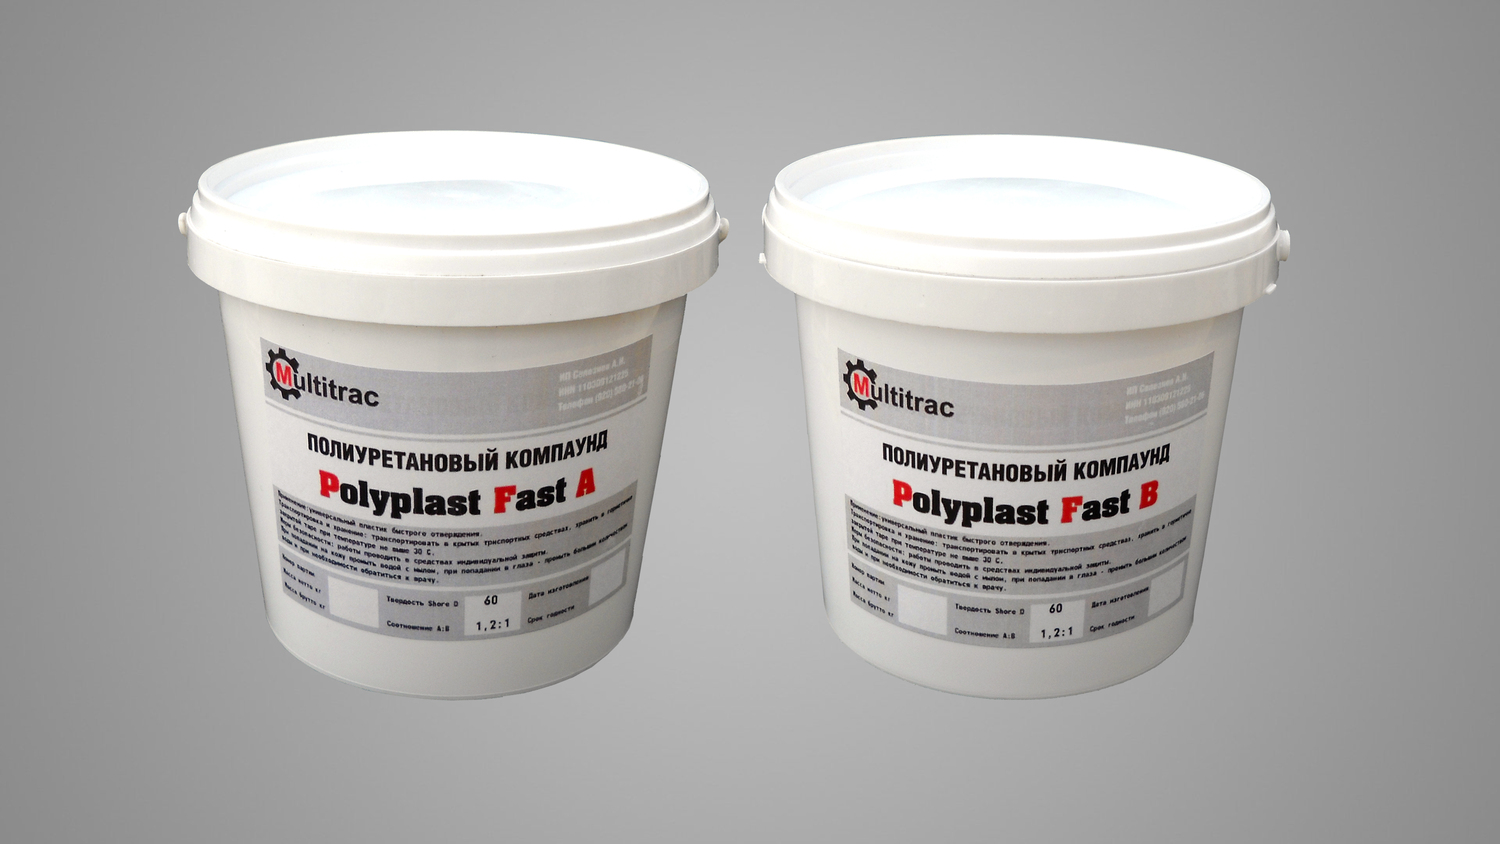 <span style="font-weight: bold;">Polyplast Fast</span>